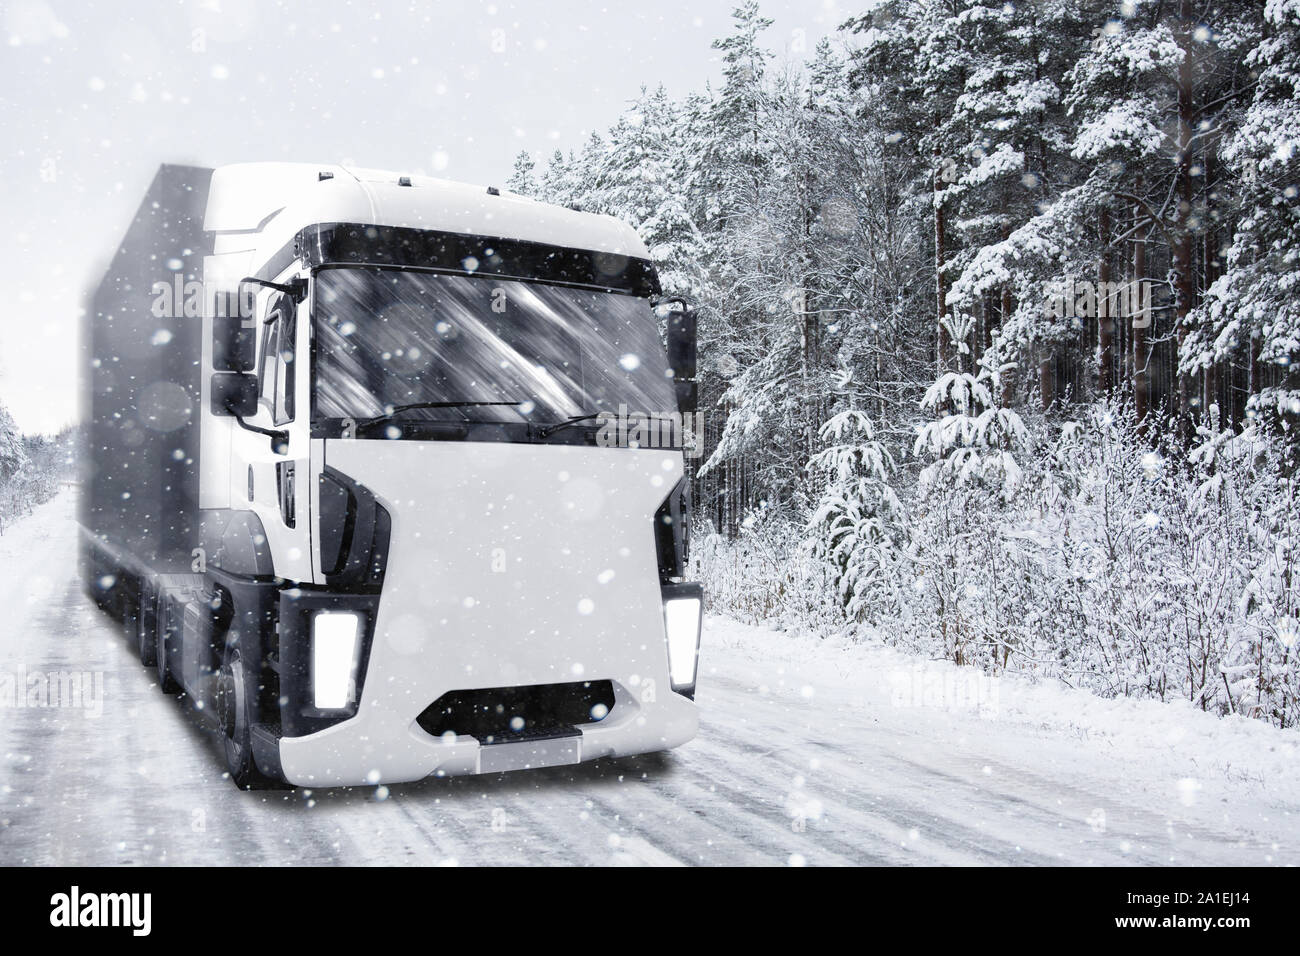 Truck rides on winter road in snowfall Stock Photo